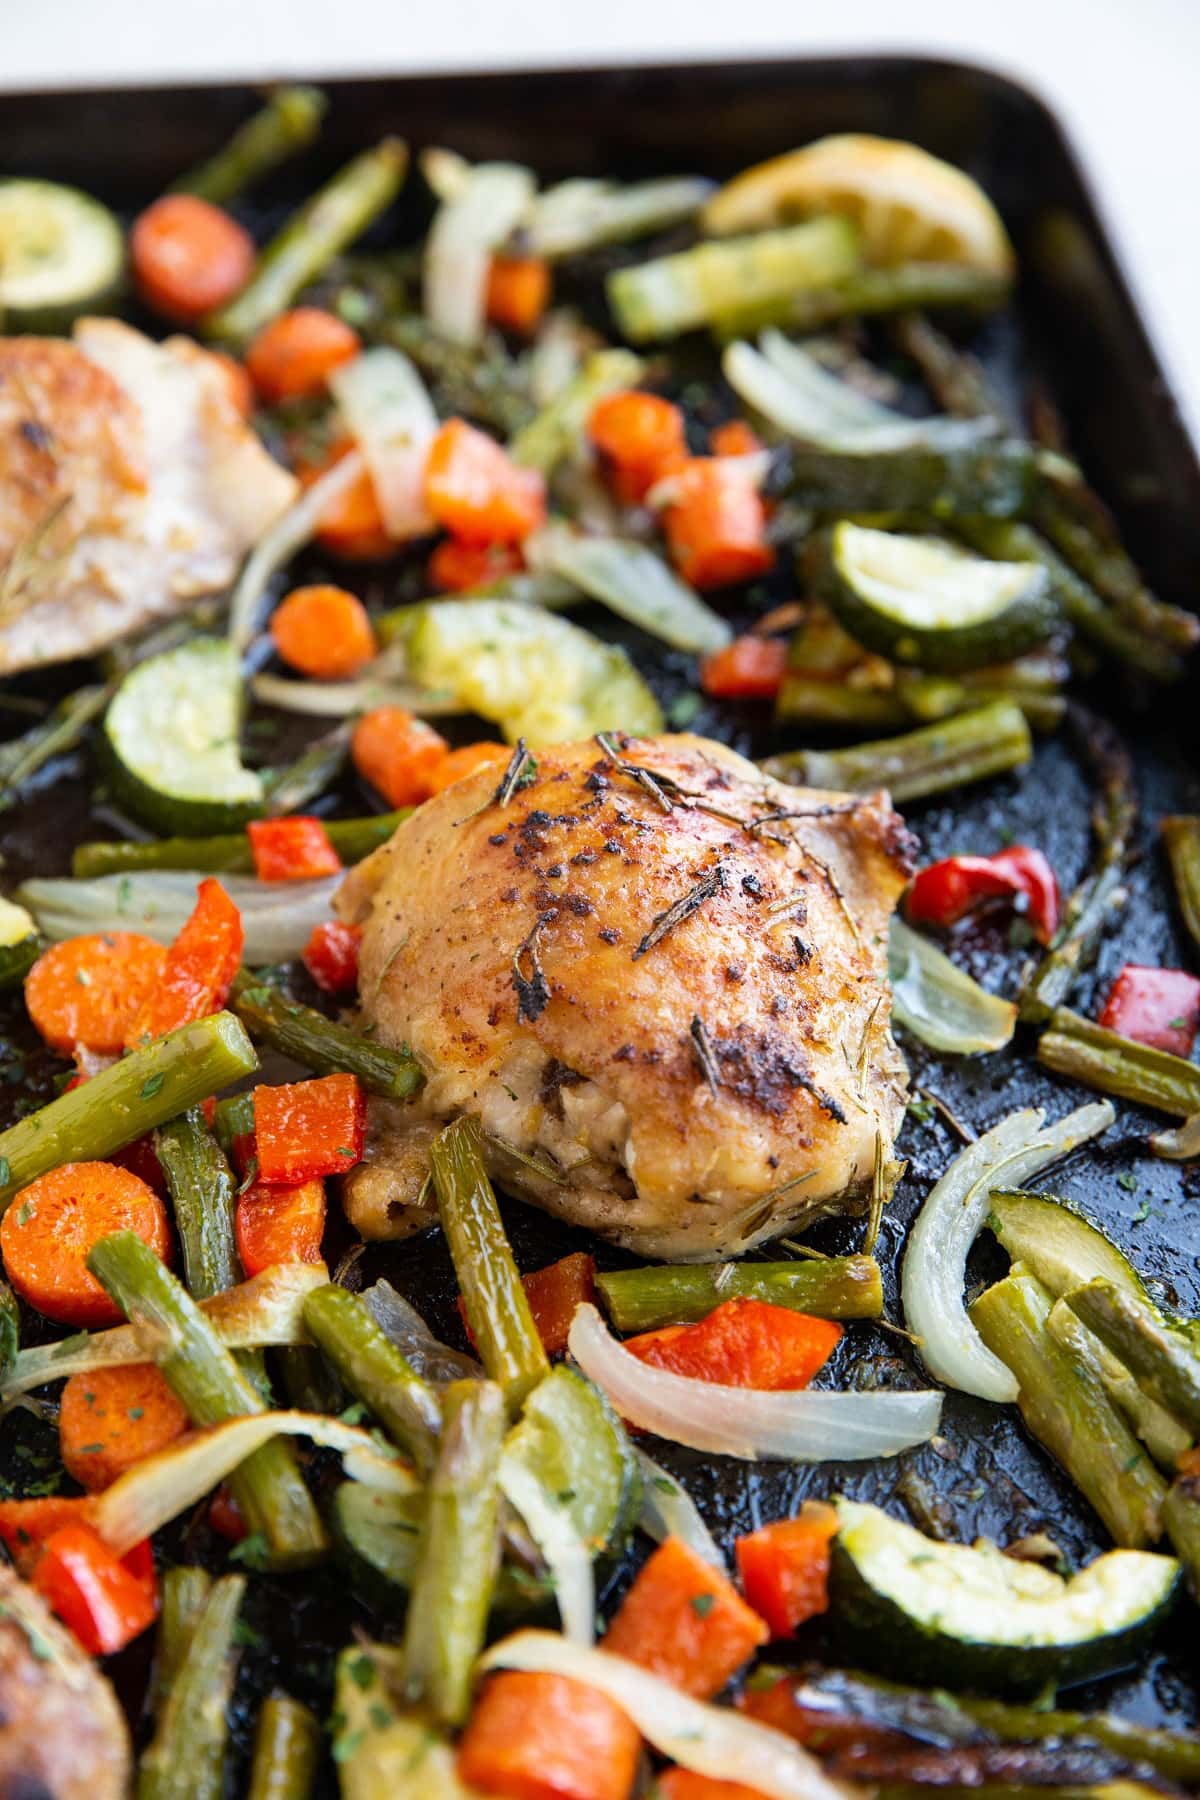 Sheet pan with roasted vegetables and chicken thighs.